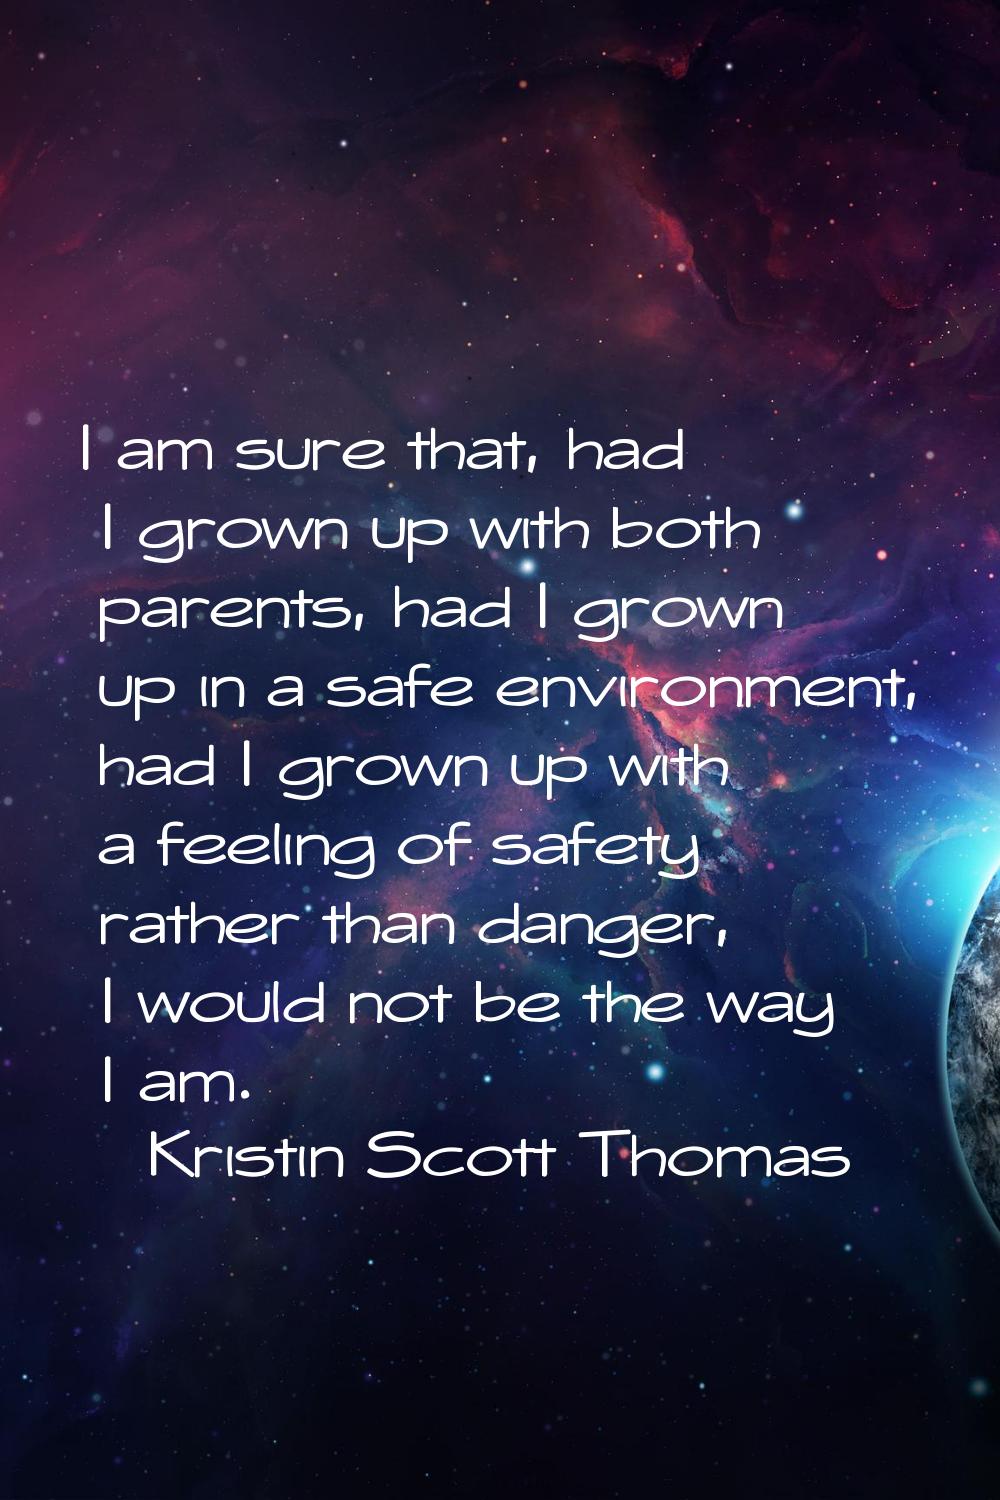 I am sure that, had I grown up with both parents, had I grown up in a safe environment, had I grown